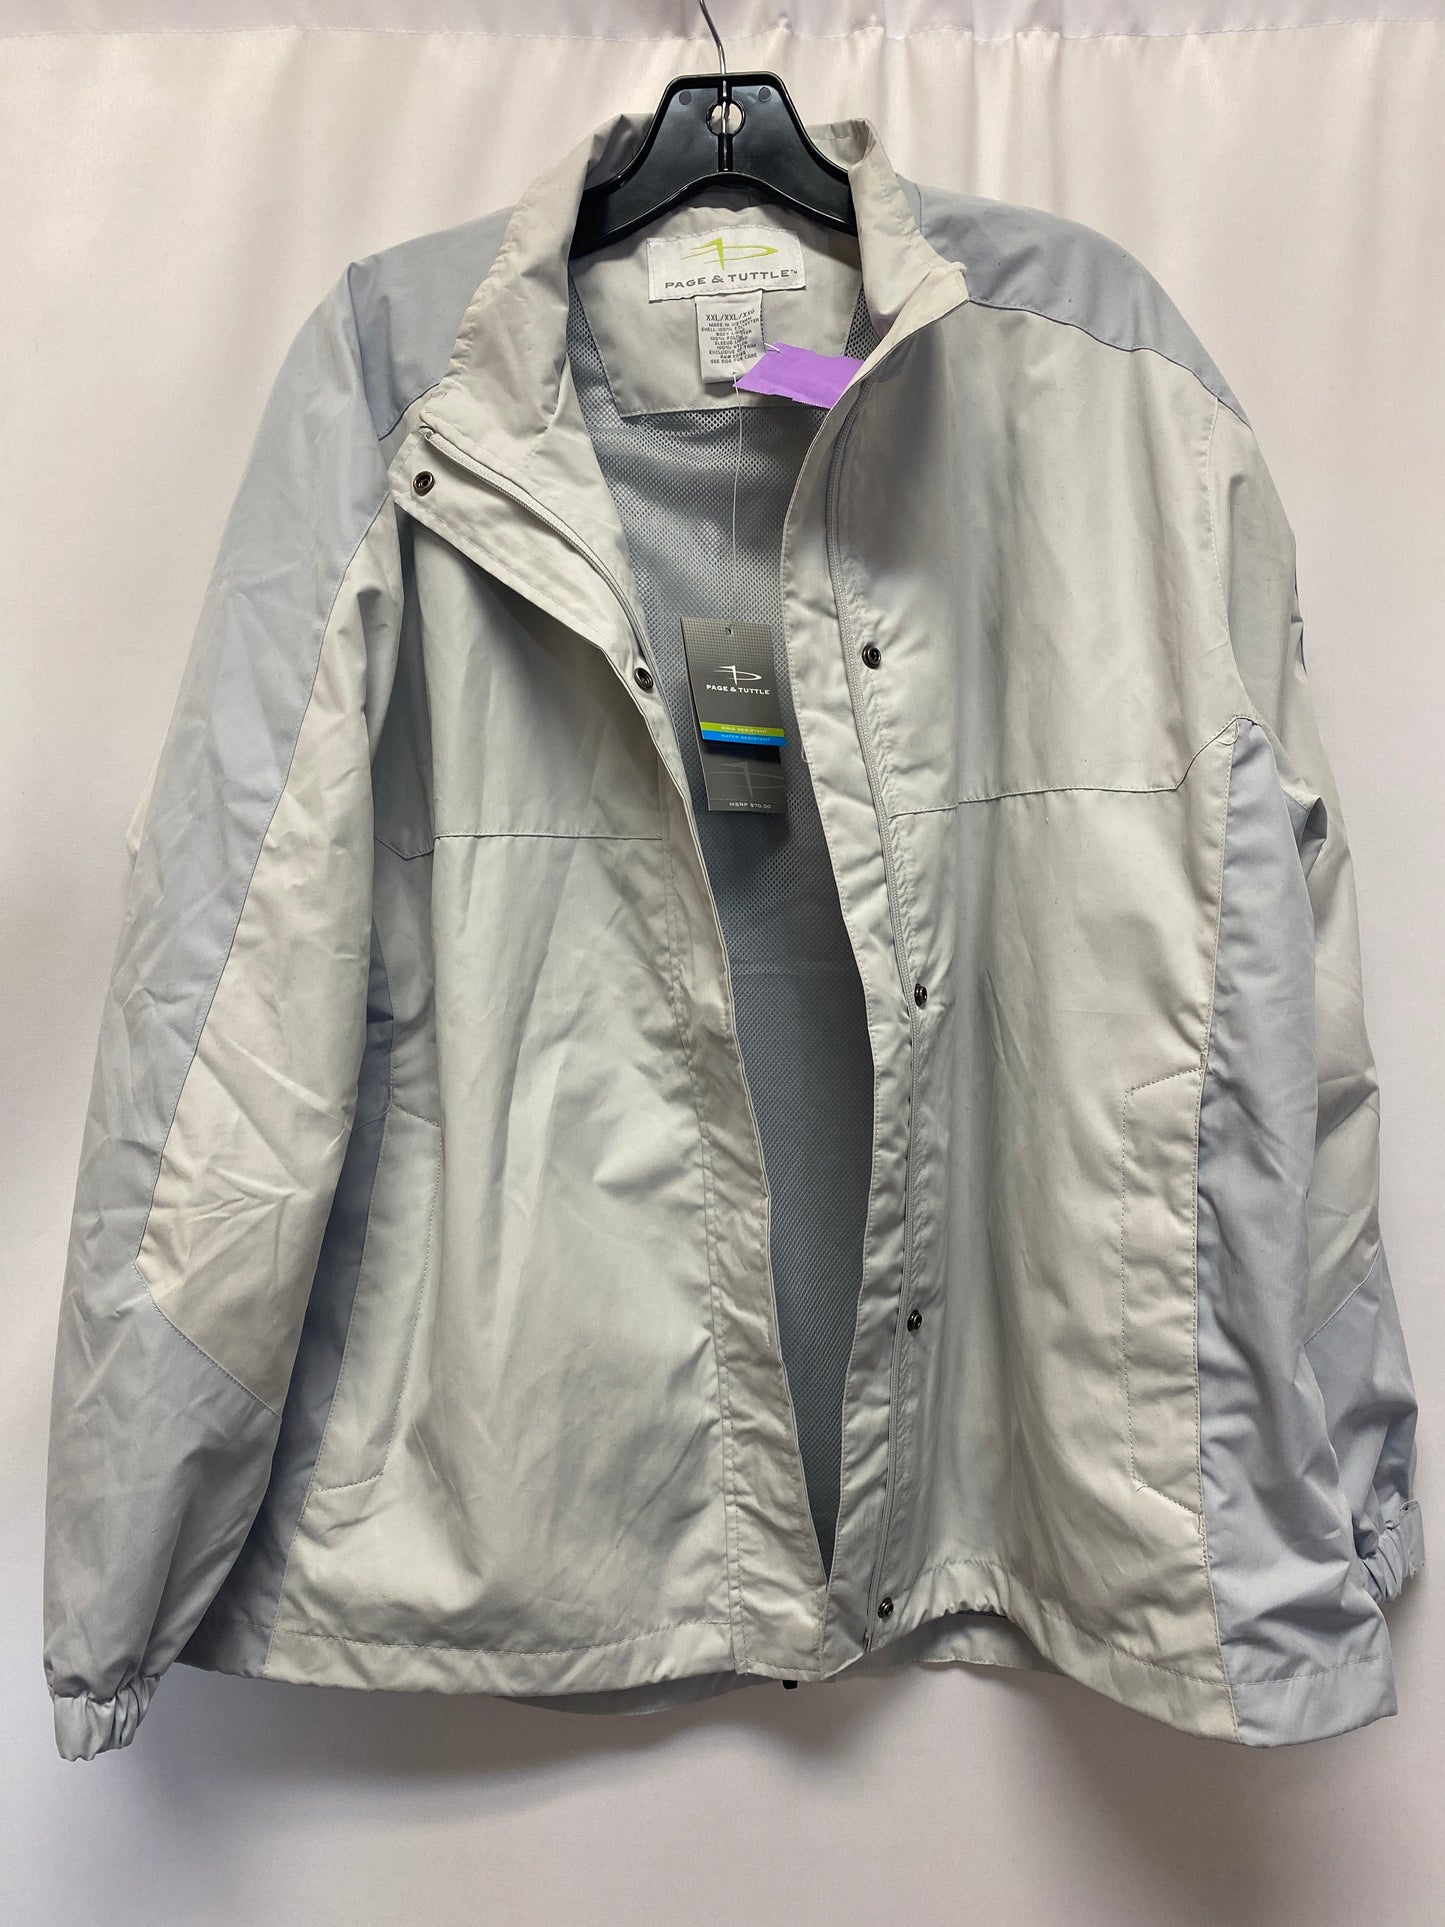 Coat Raincoat By Clothes Mentor  Size: Xxl